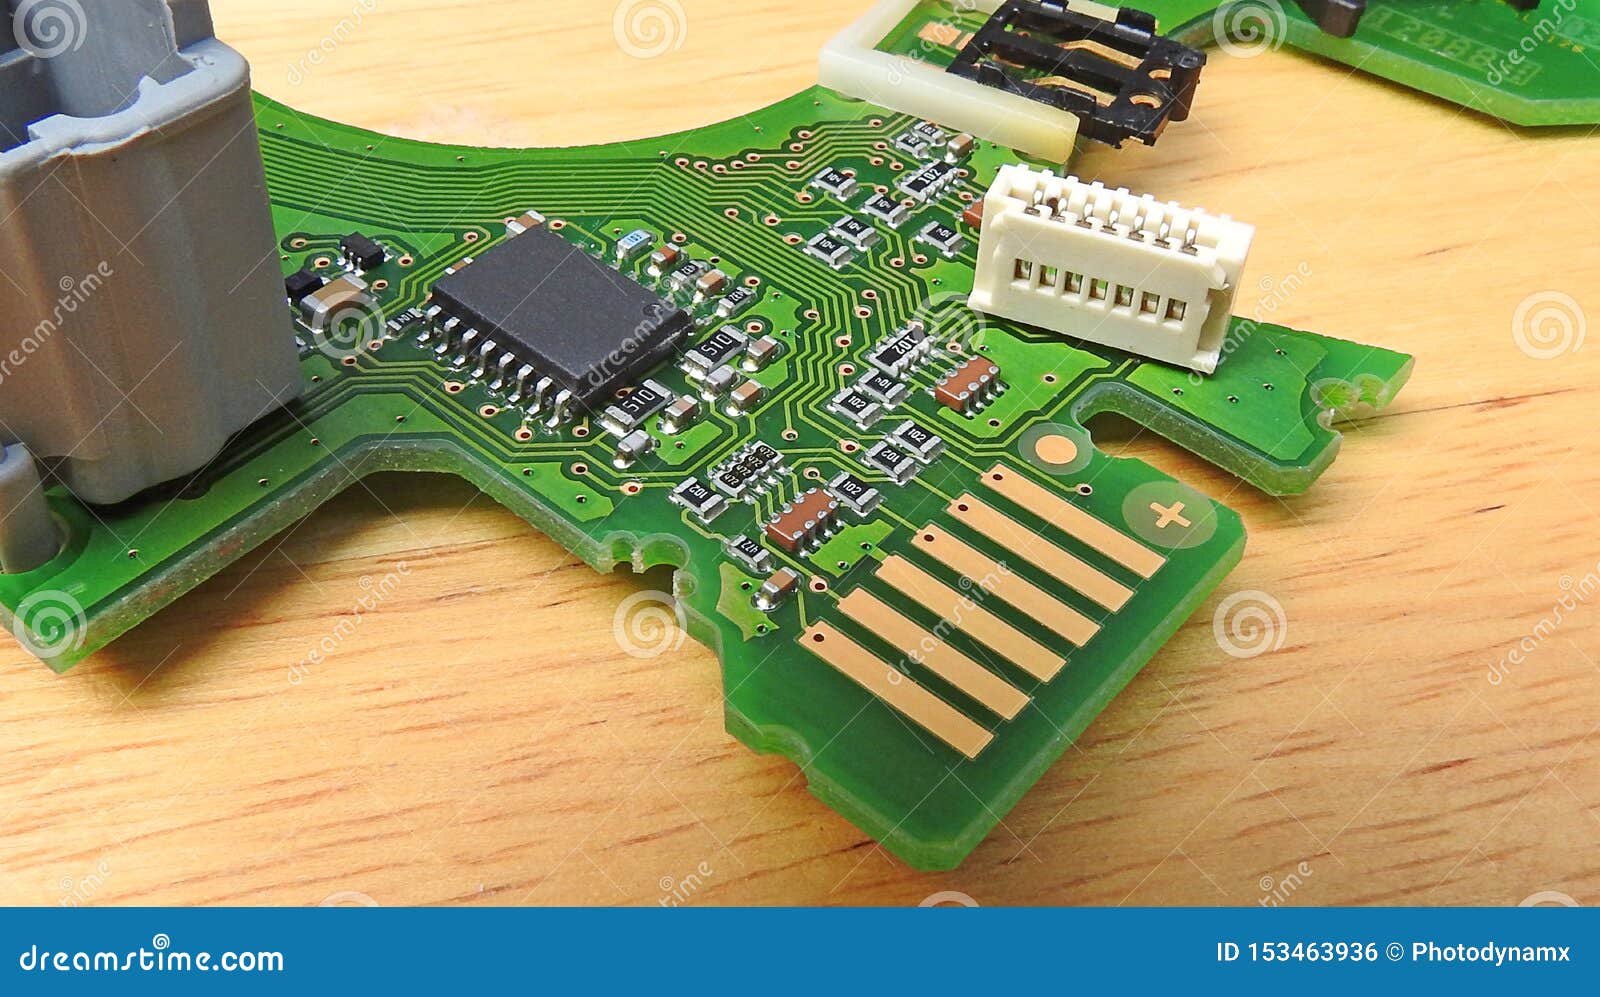 pcb printed circuit board comms unit control panel switches points microchip electronic